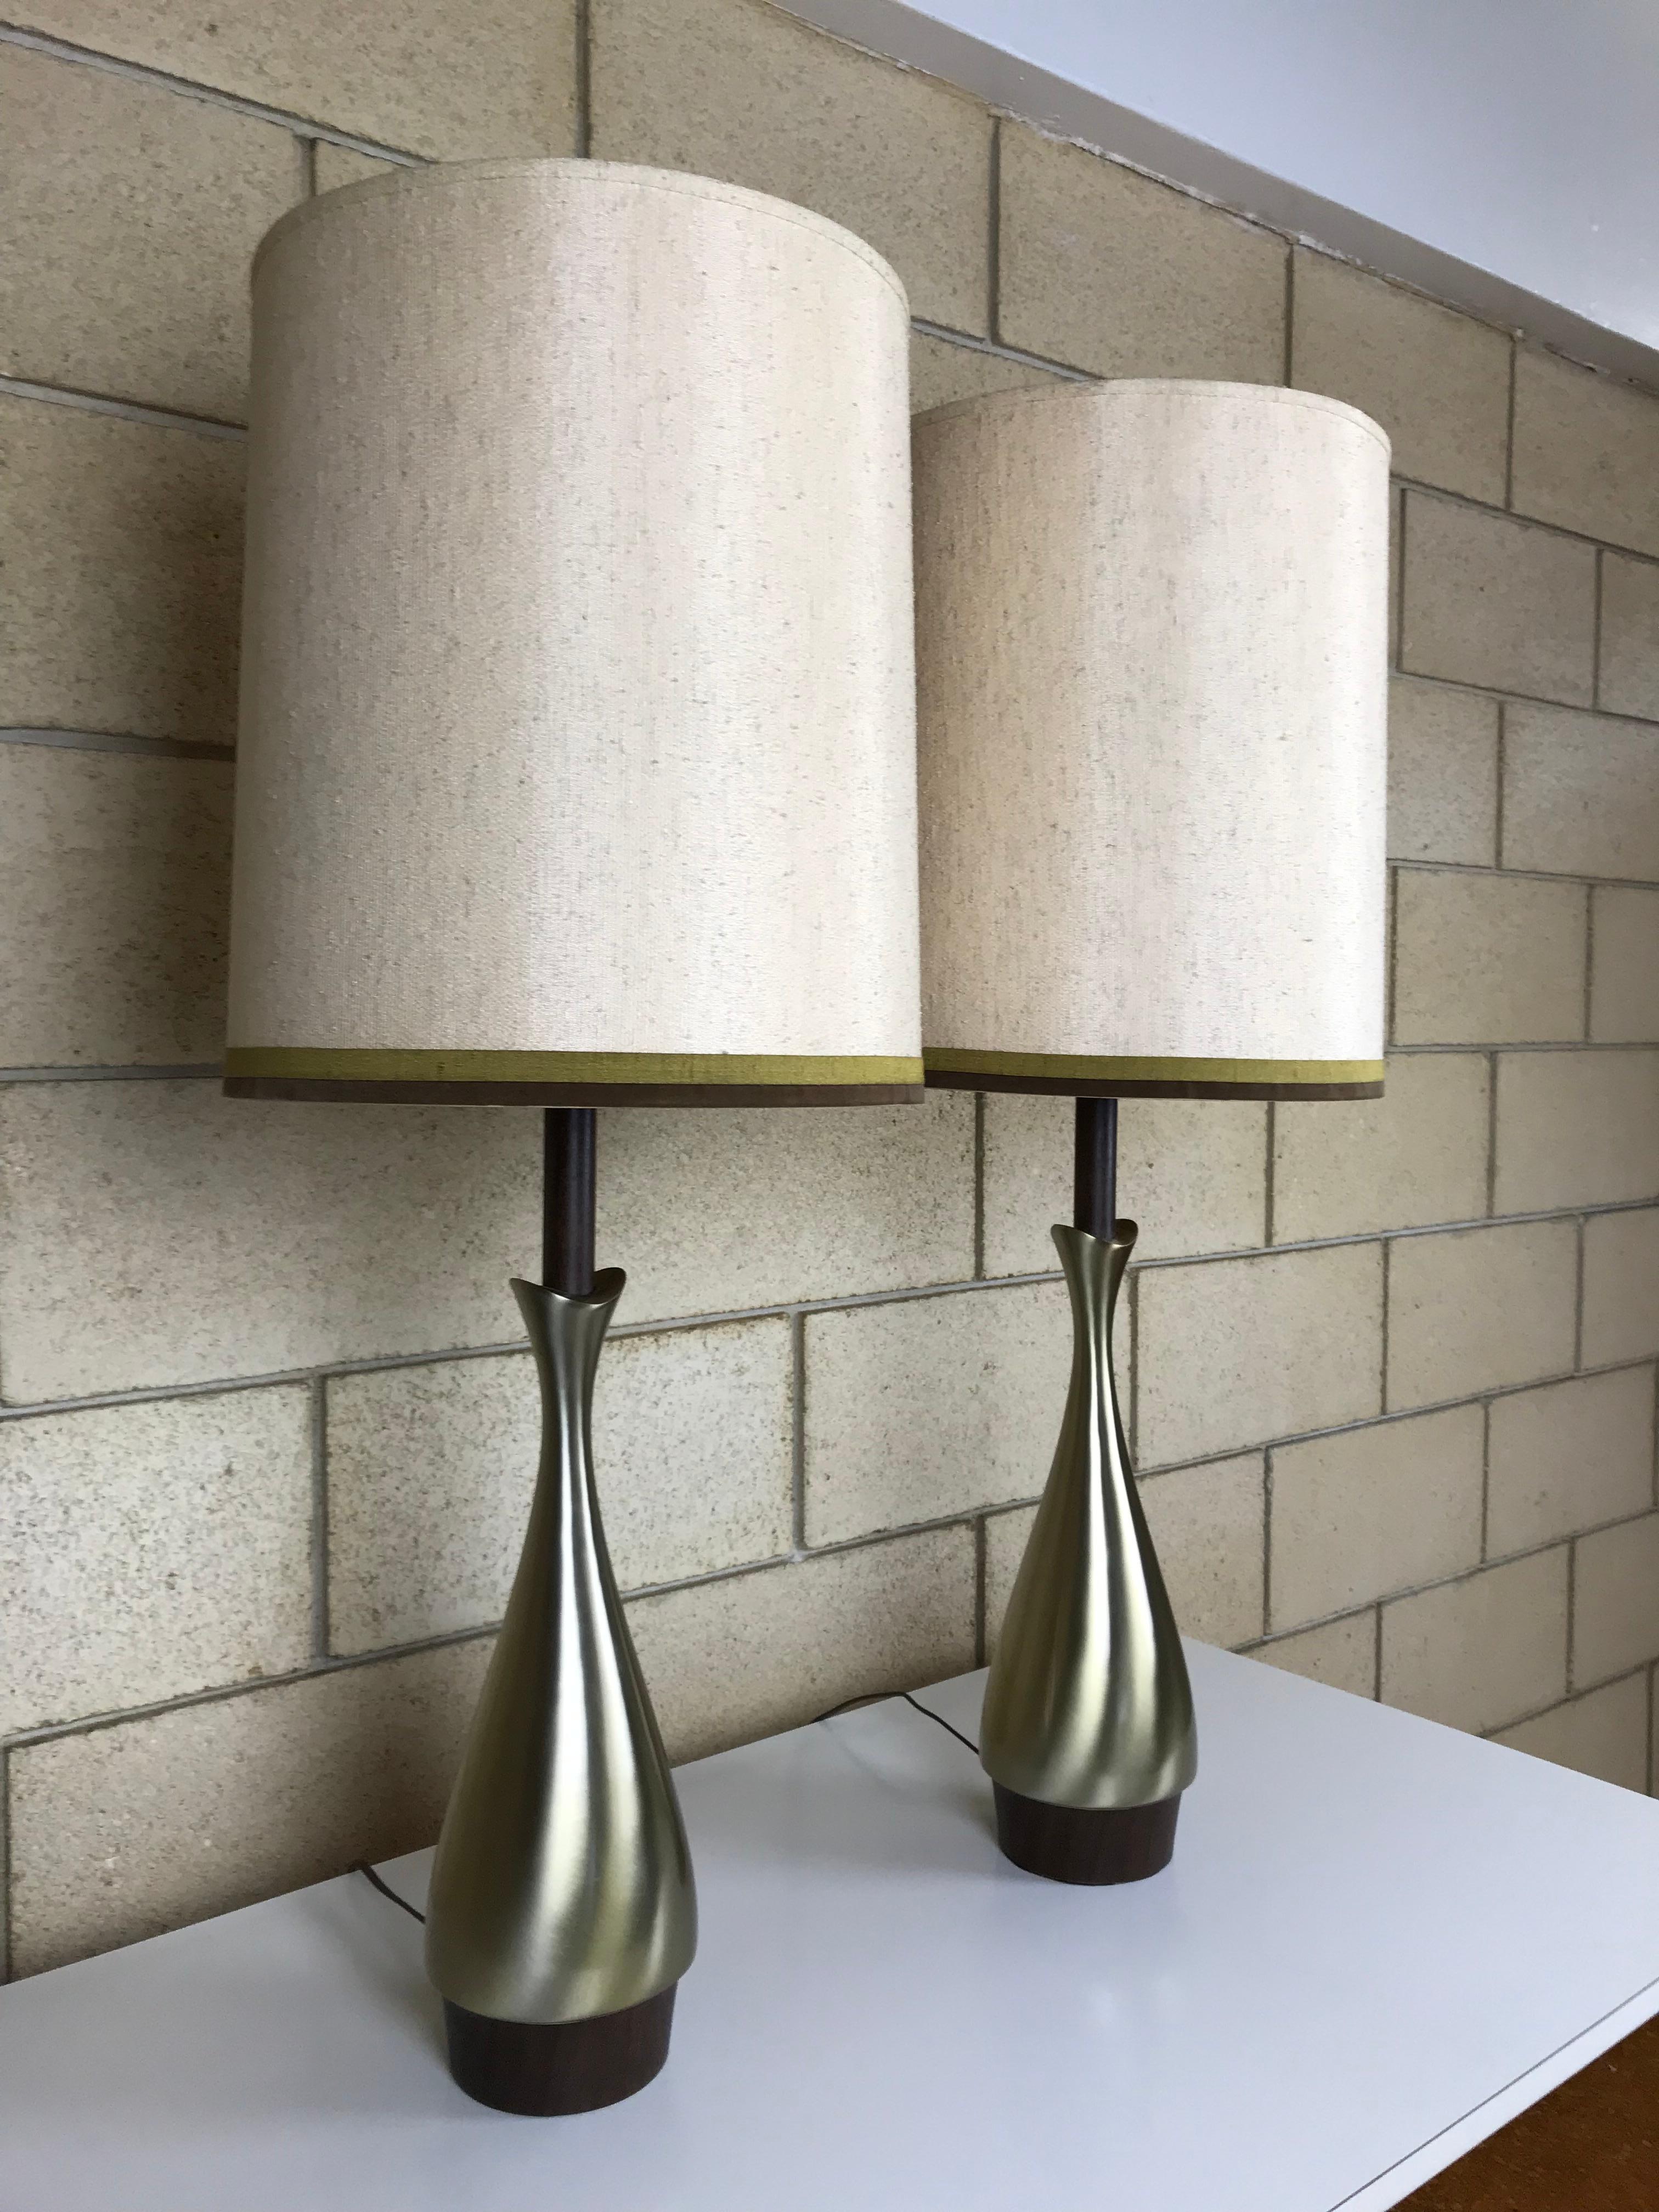 Pair of Fluted Genie Brass Tables Lamps by Laurel Lamp Co. 1